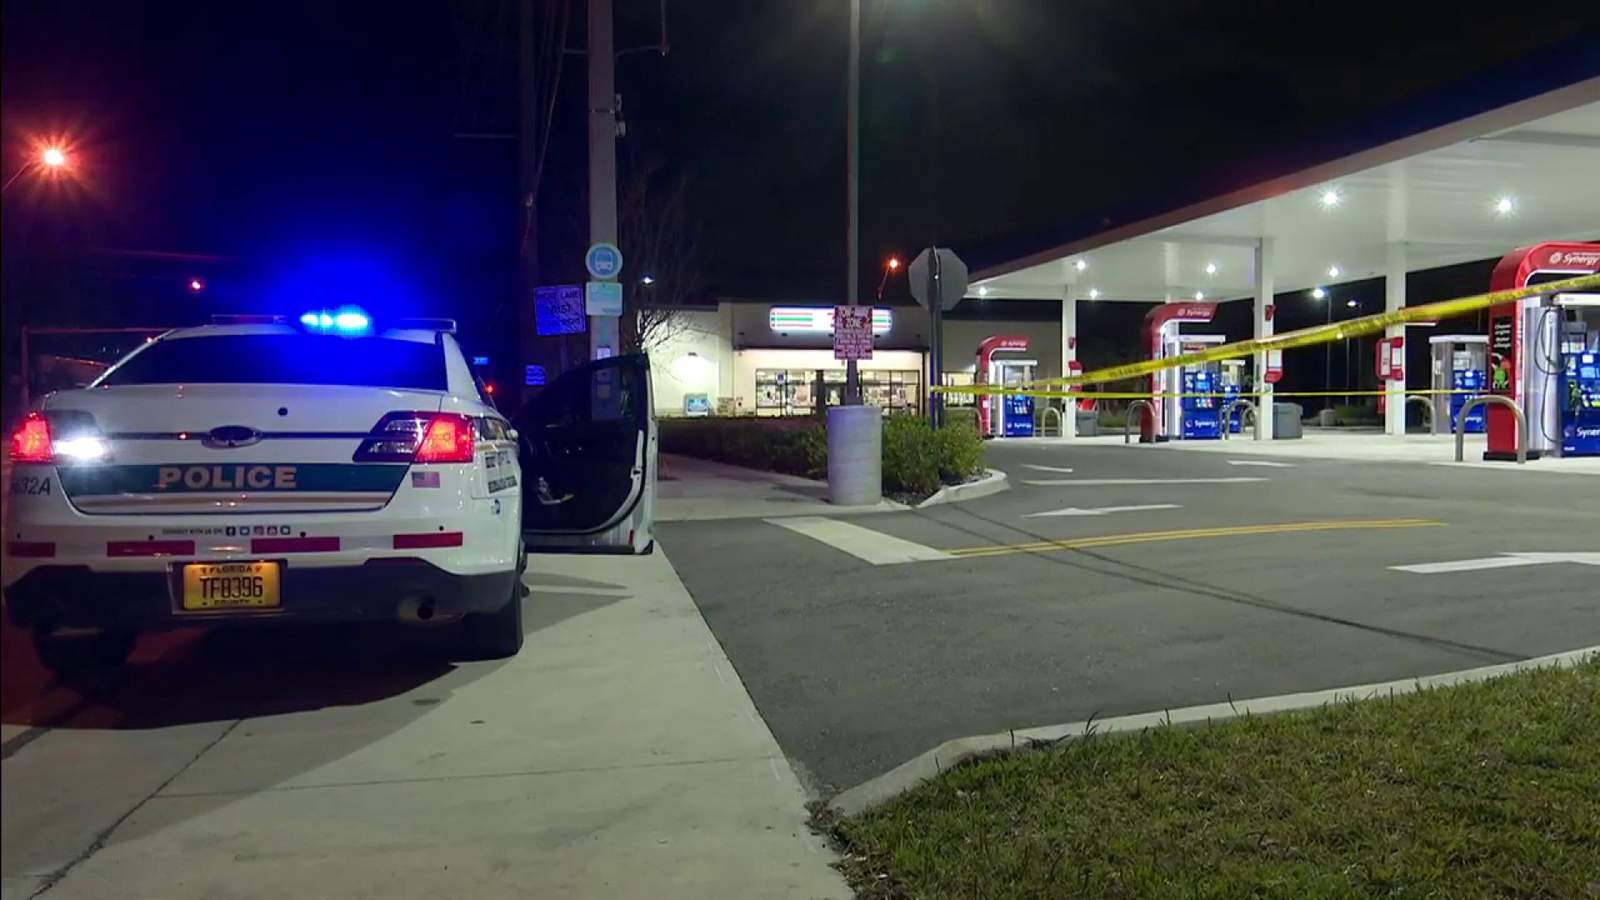 Police investigating as truck reportedly pulls into 7-Eleven parking lot with 3 people shot inside